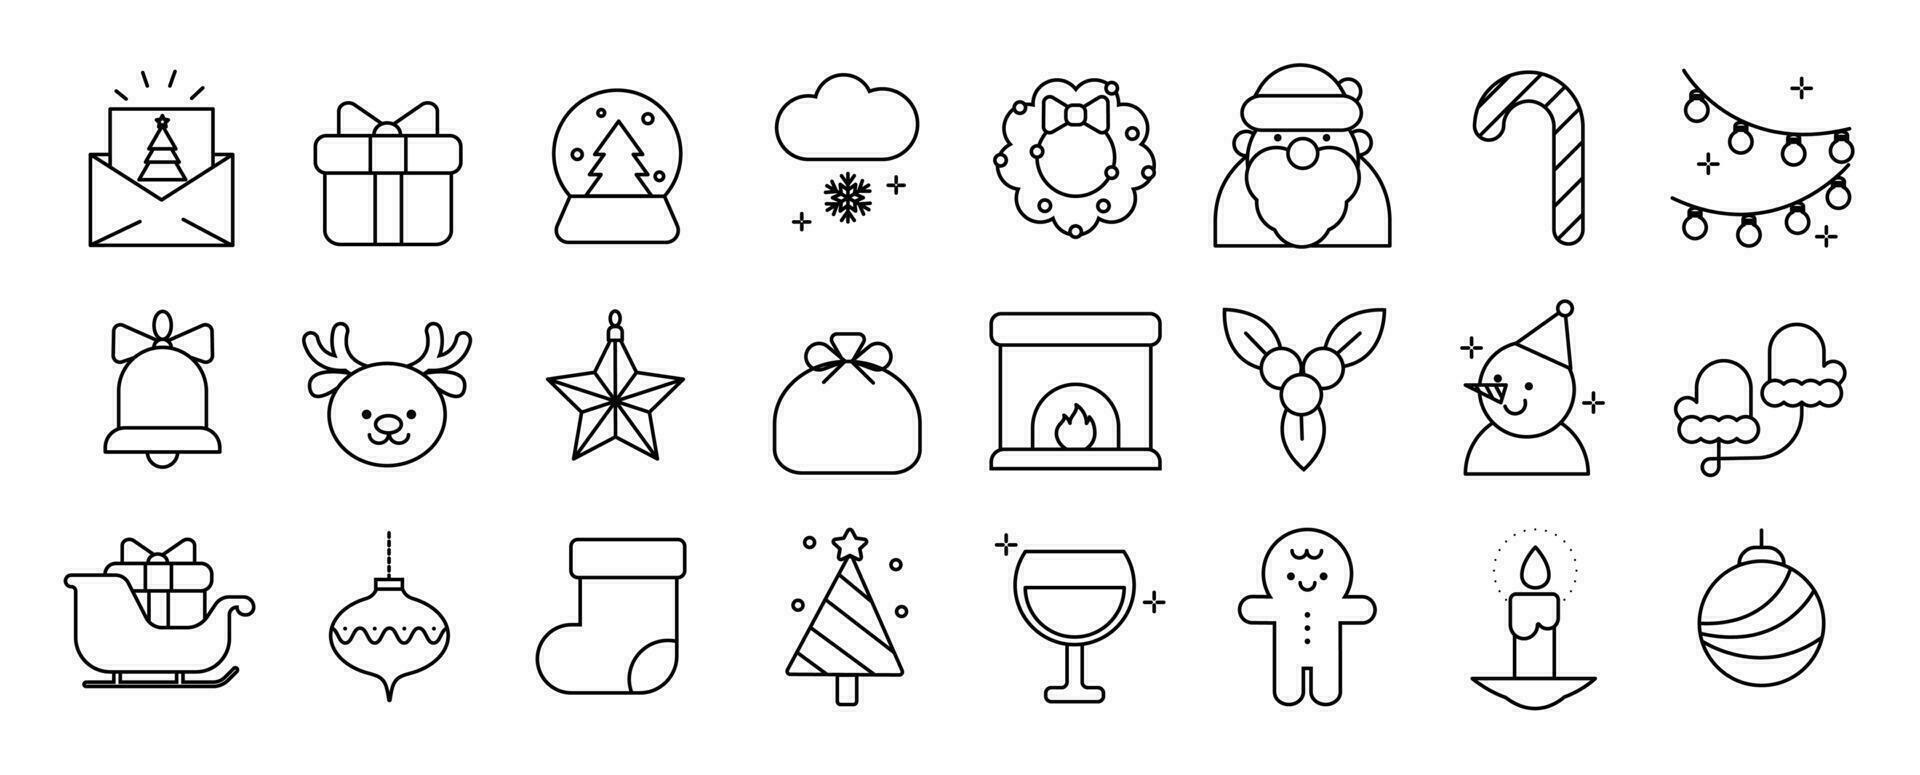 Merry Christmas and winter season doodle icon vector. Set of bauble ball, envelope, chimney, santa, snowman, gingerbread, candle, pine. Winter festival and holiday collection for kids, decorative. vector